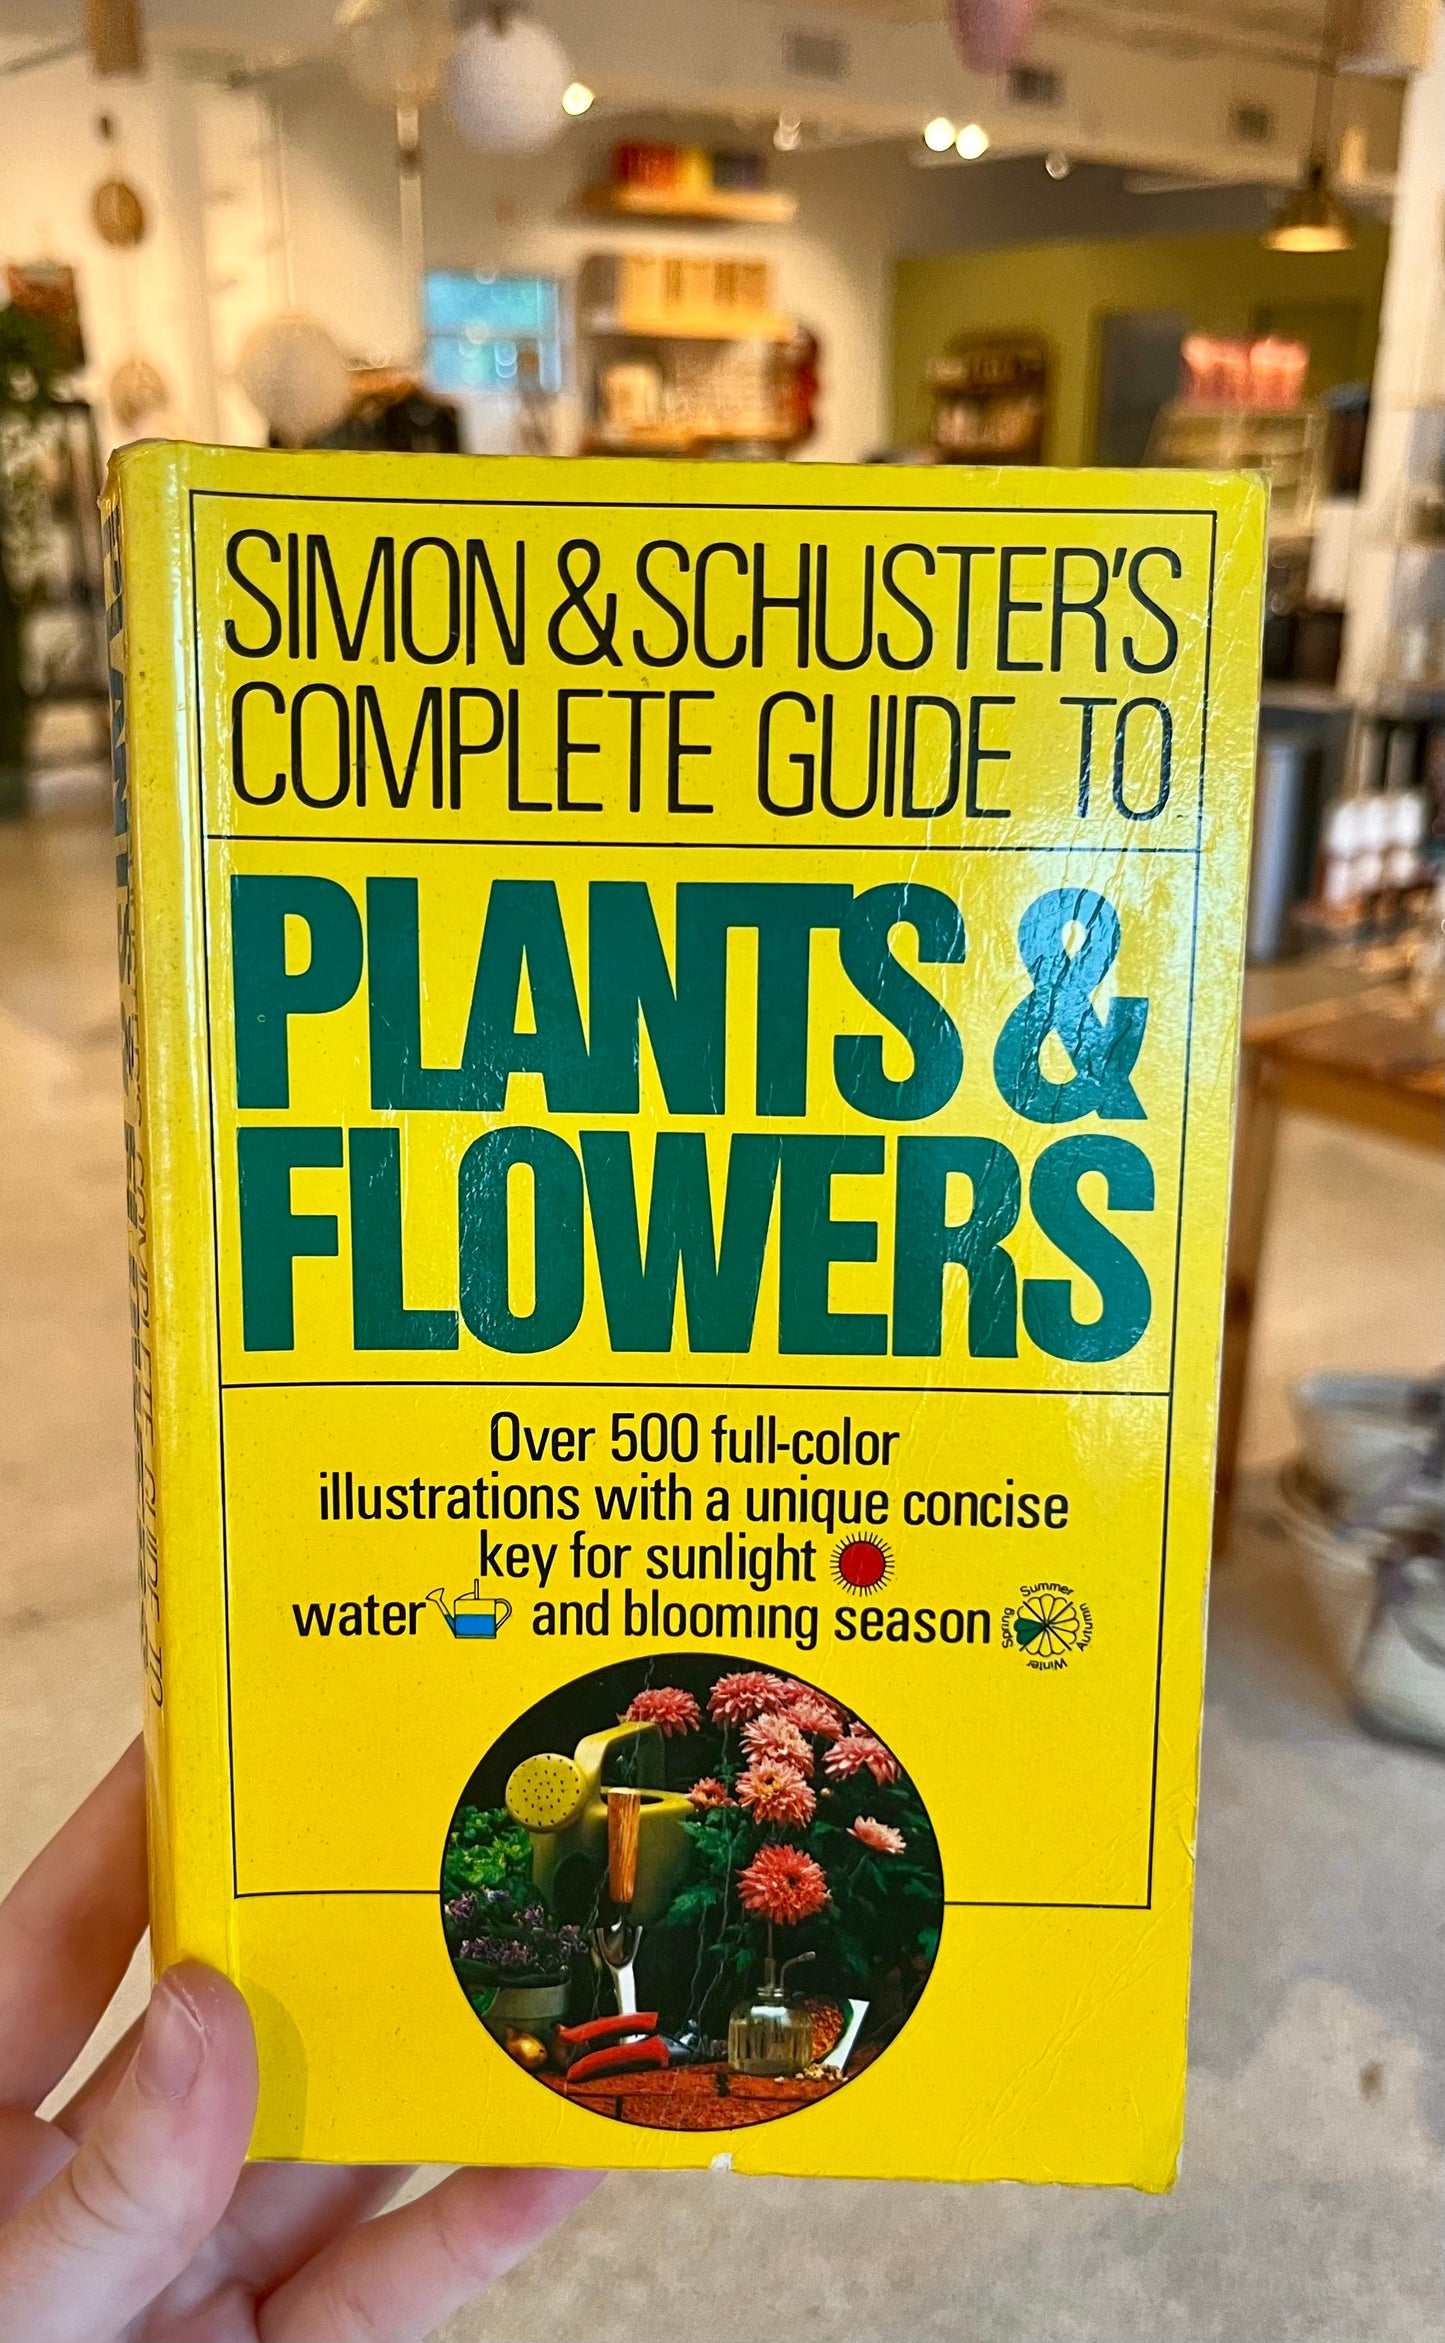 Simon & Schuster’s Complete Guide To Plants And Flowers